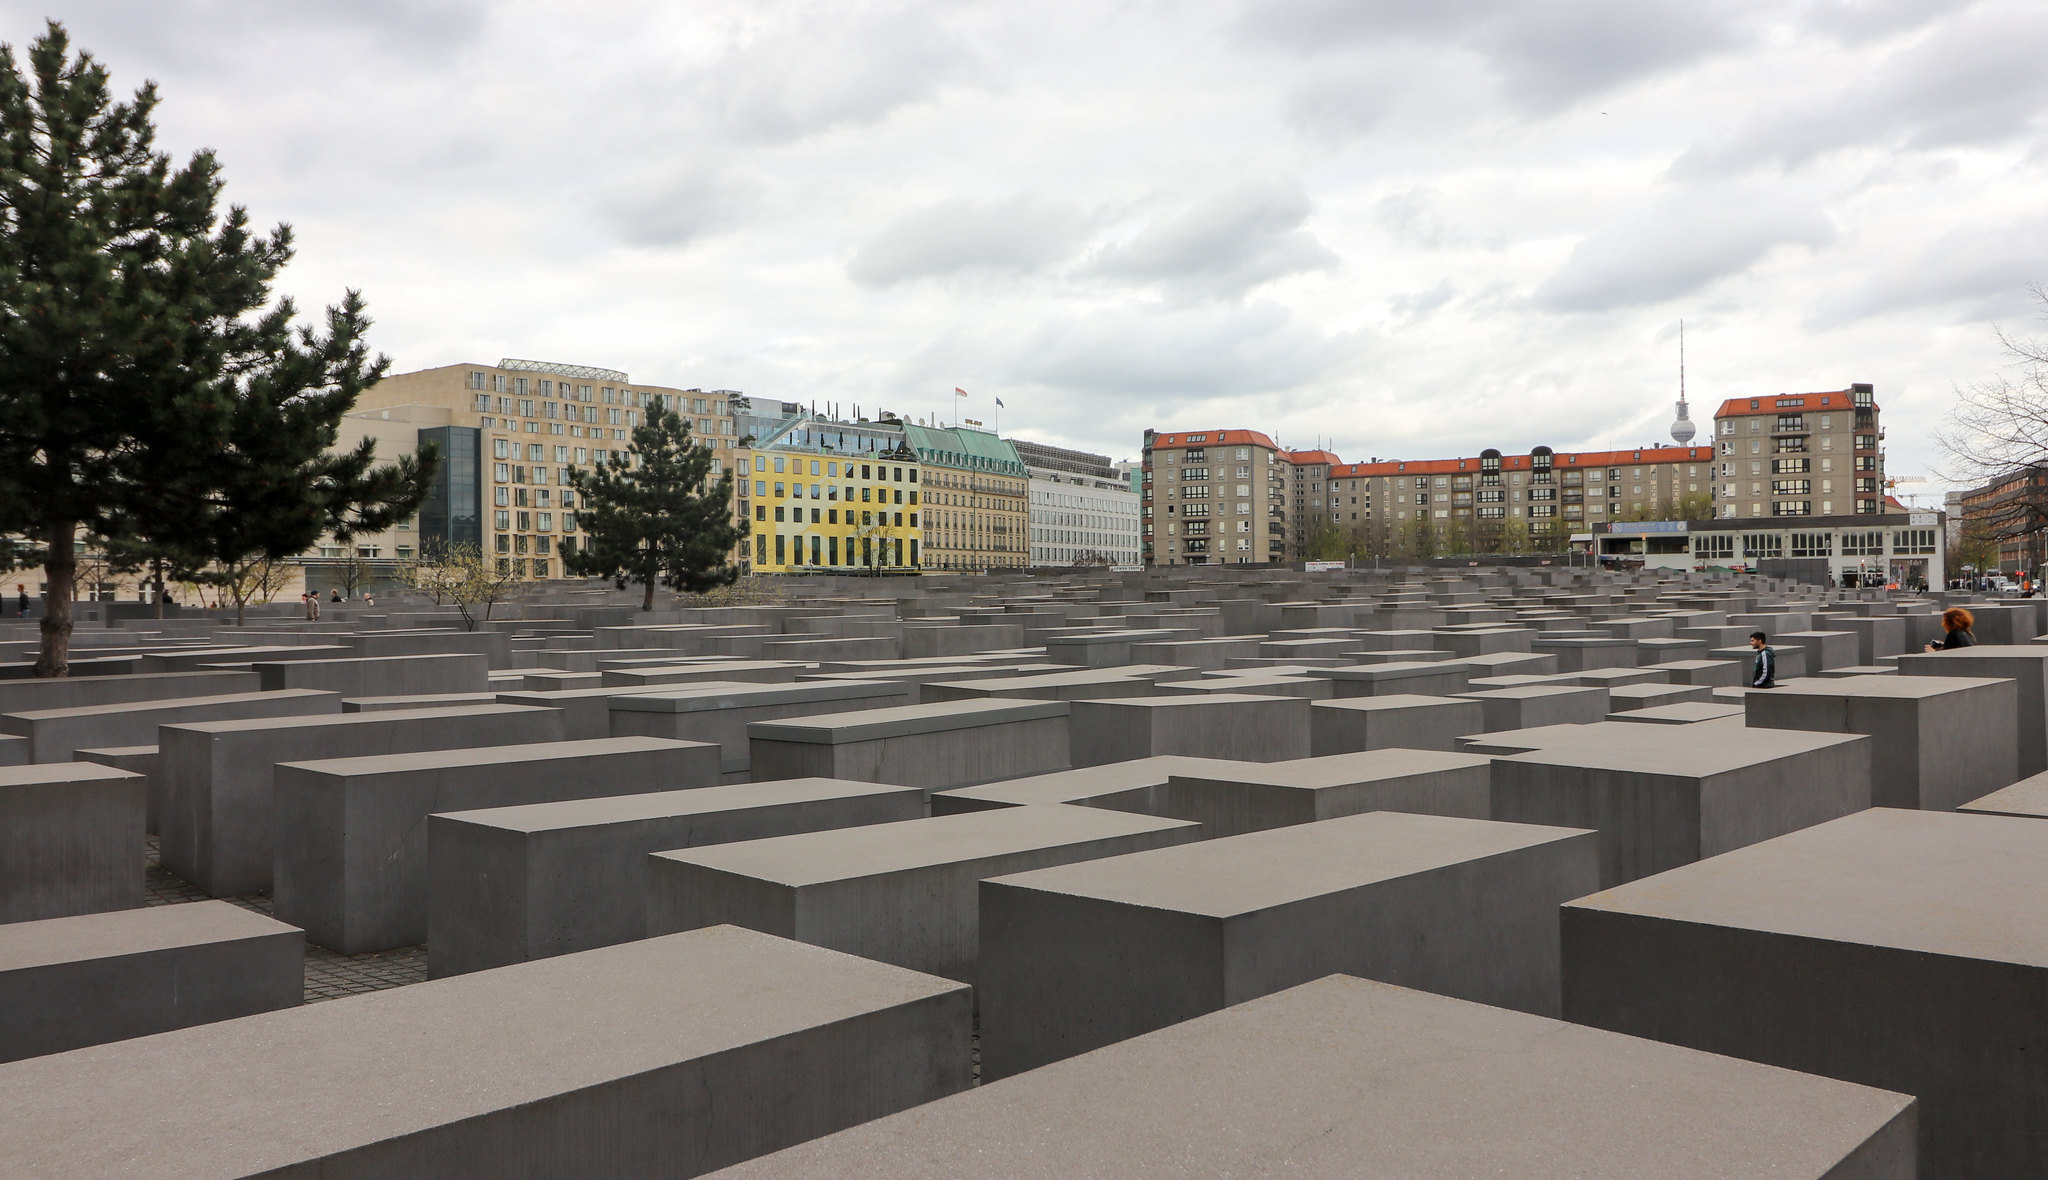 10 Best Things To Do in Berlin, Germany [with Suggested Tours]